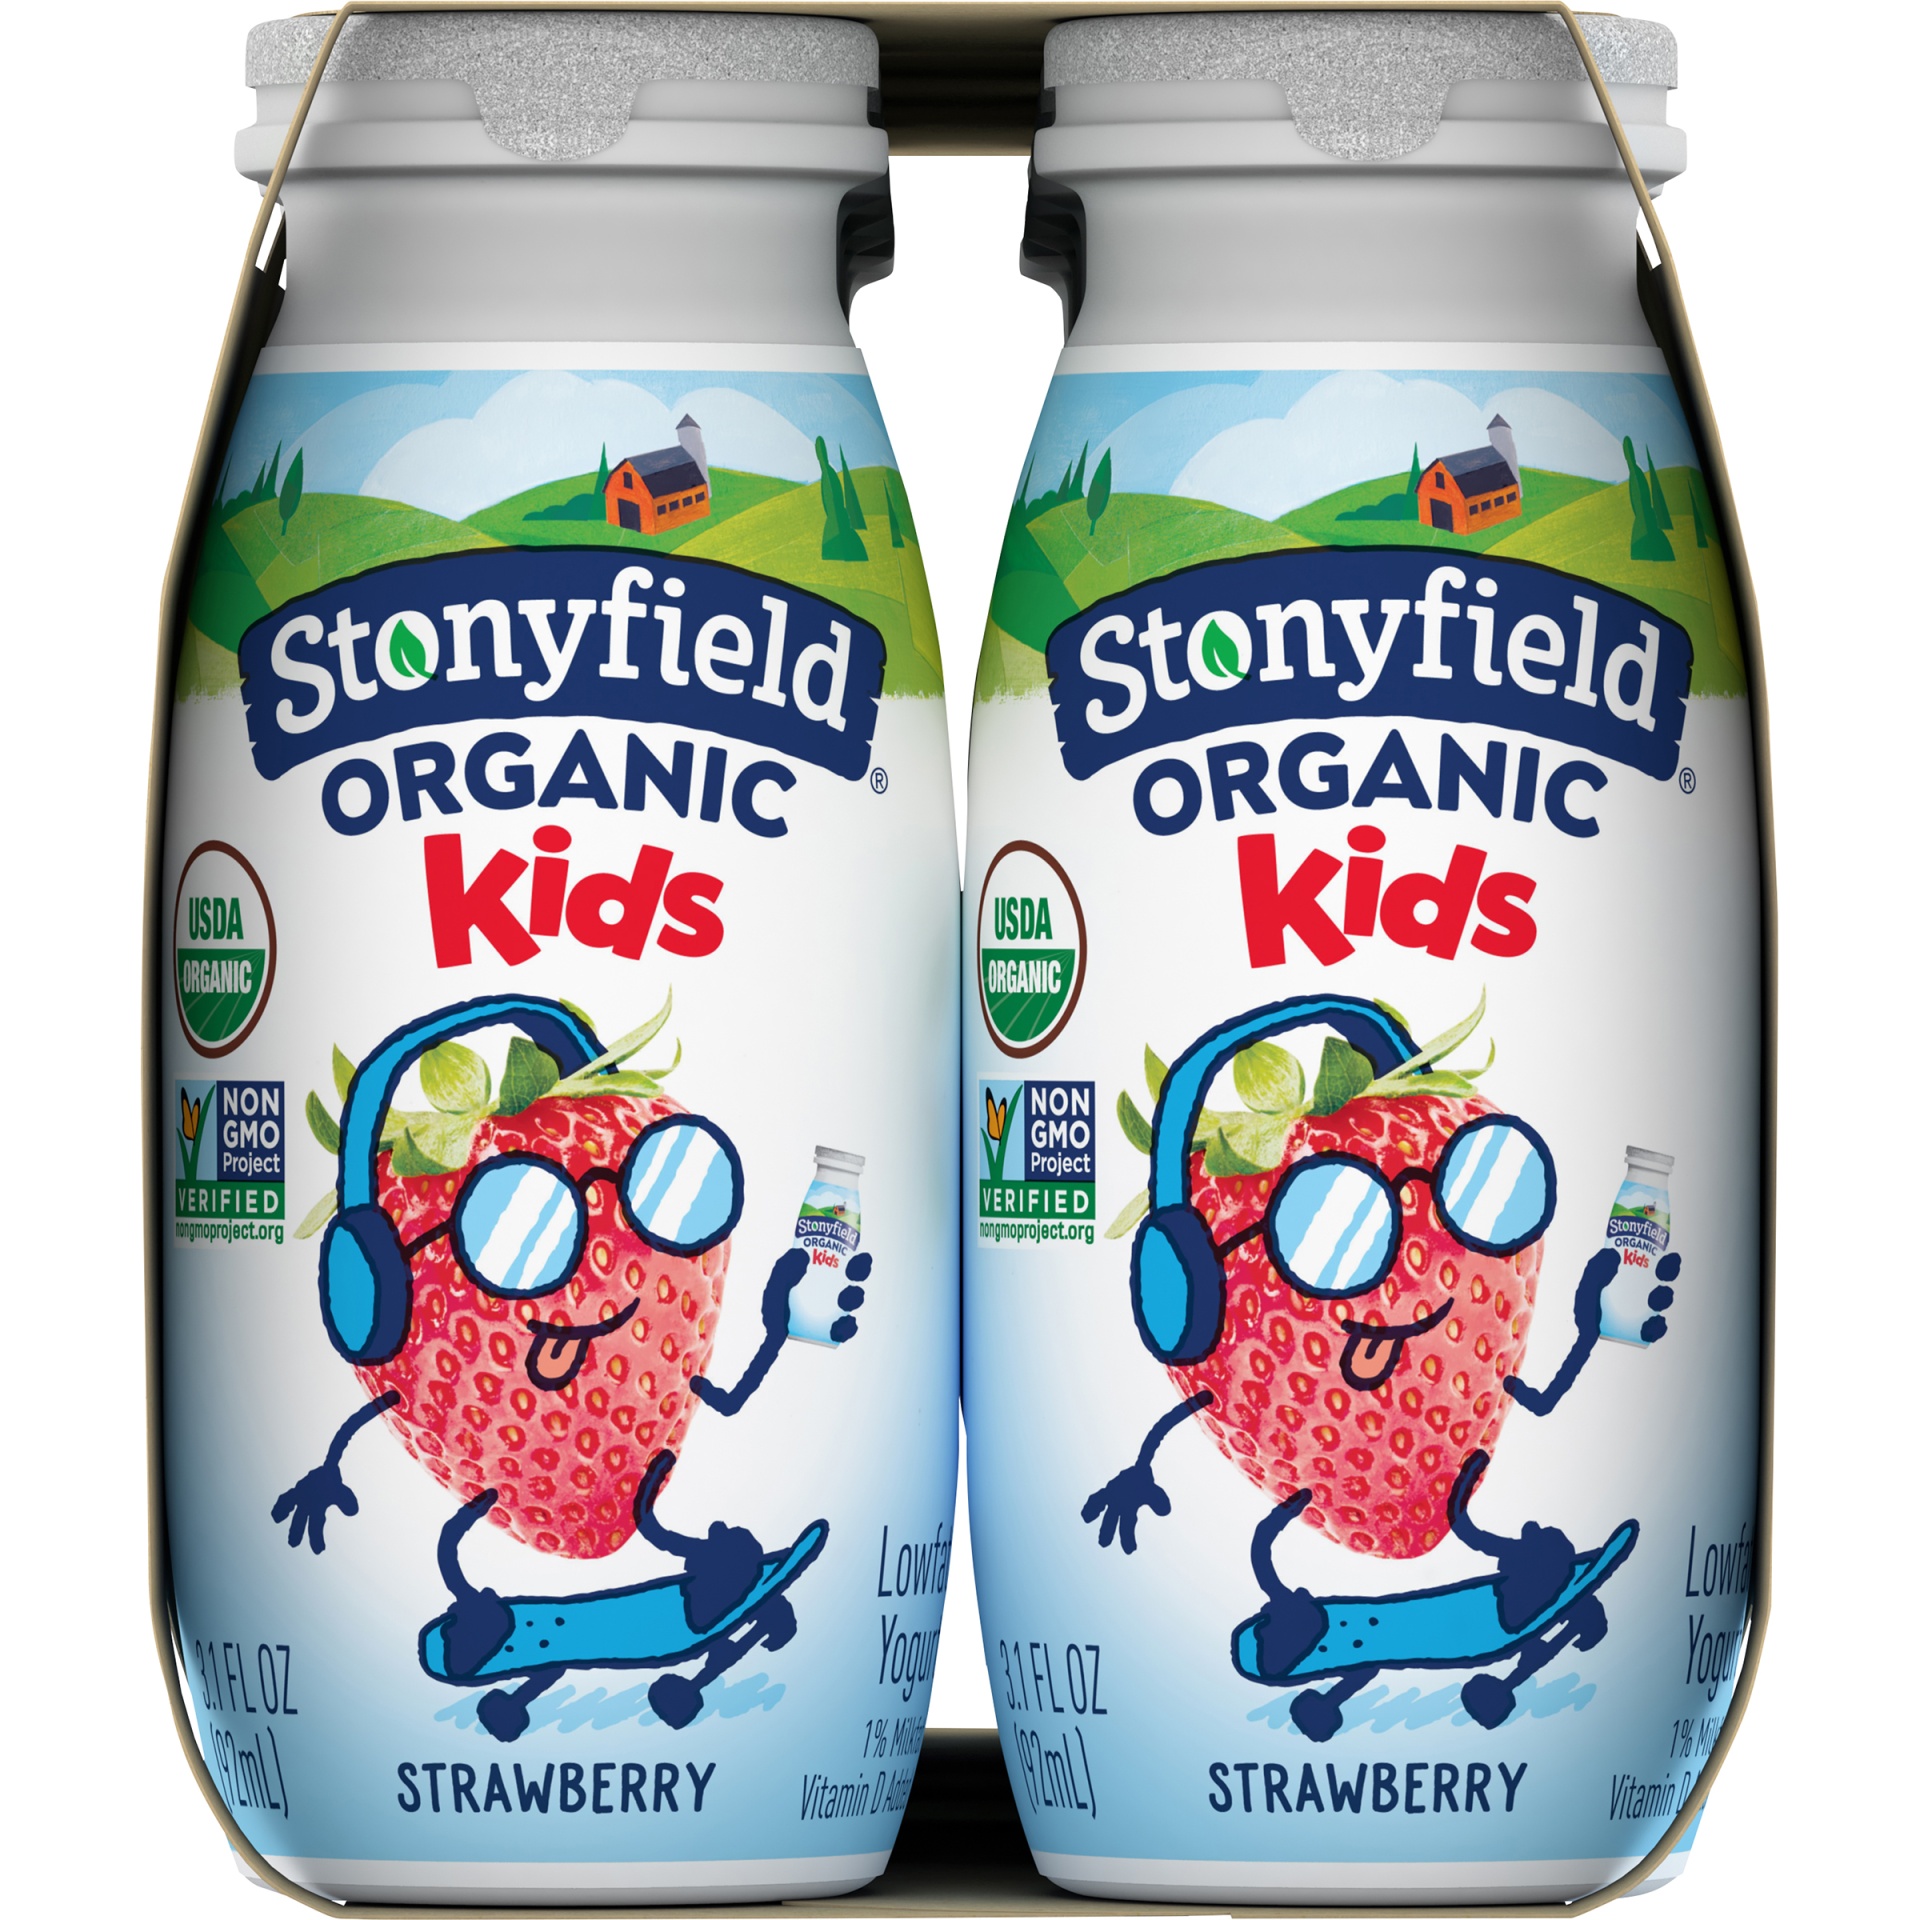 slide 2 of 2, Stonyfield Organic Kids Lowfat Yogurt Smoothies are the perfect handheld snack for busy kids. Stash in your child's lunch box, or in your car cooler during road trips. These low fat smoothies are made with wholesome ingredients without artificial flavors, sweeteners or high fructose corn syrup. With vitamin D and calcium to support the growth and maintenance of healthy bones. The result? A delicious and nutritious snack that you can feel good about. Like all Stonyfield Organic products, these are made without the use of toxic persistent pesticides or genetically modified organisms (GMOs), protecting growing kids and contributing to a healthy and sustainable world. Try our full line of products for babies, kids and adults,  including yogurt cups, yogurt pouches, multi-serving yogurt containers, dairy free smoothie pouches, drinkable yogurt, yogurt tubes and more. With fresh taste, high quality ingredients, and no added nonsense, Stonyfield Organic Smoothies for kids are #goodonpurpose!, 